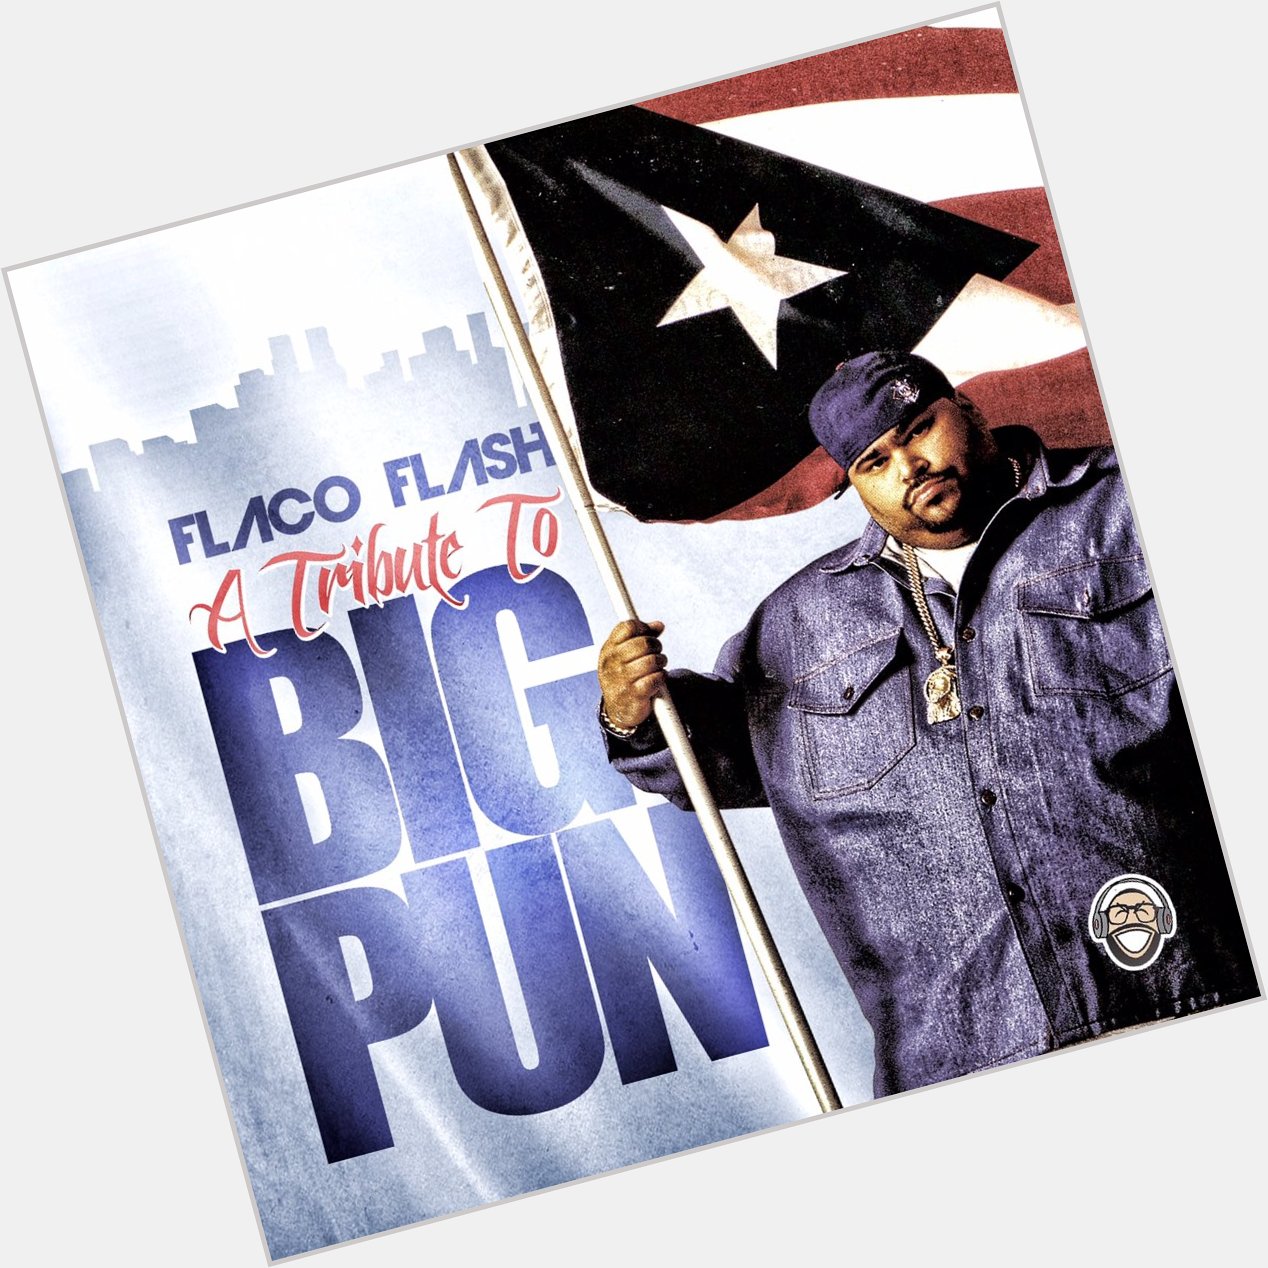 Happy birthday to the one and only Big Pun!! 